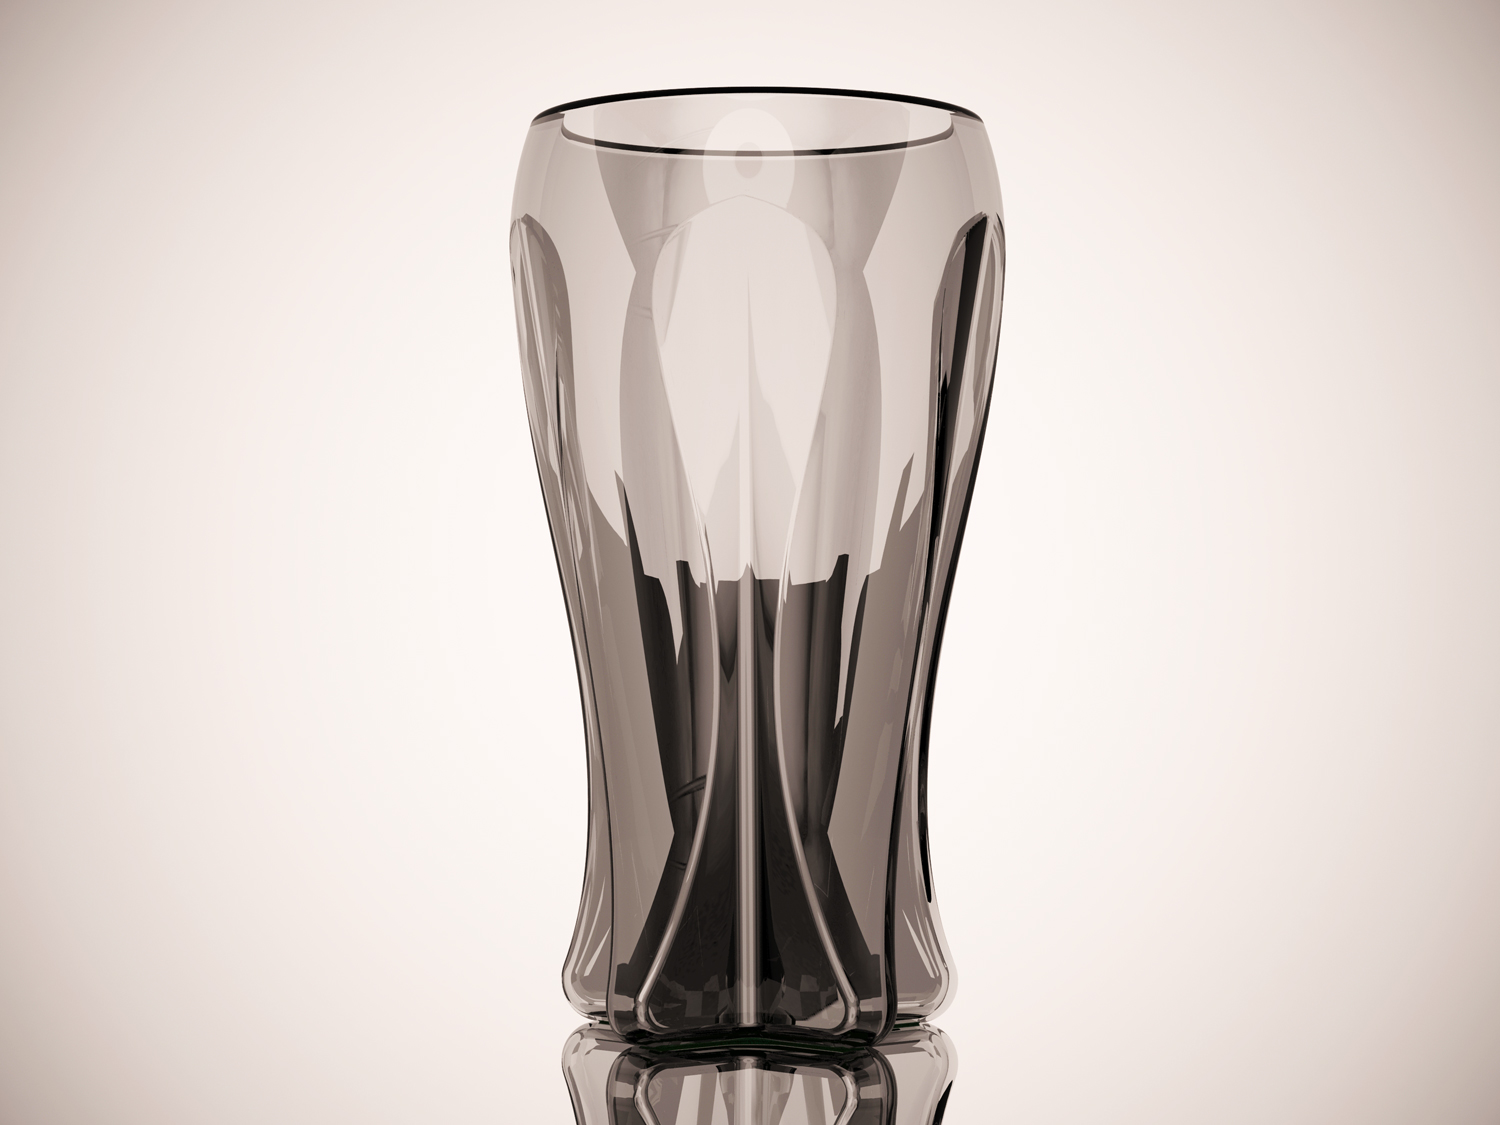 A black and white shot of one glass emphasizes the facets of its star-shaped grip-enhancing design.